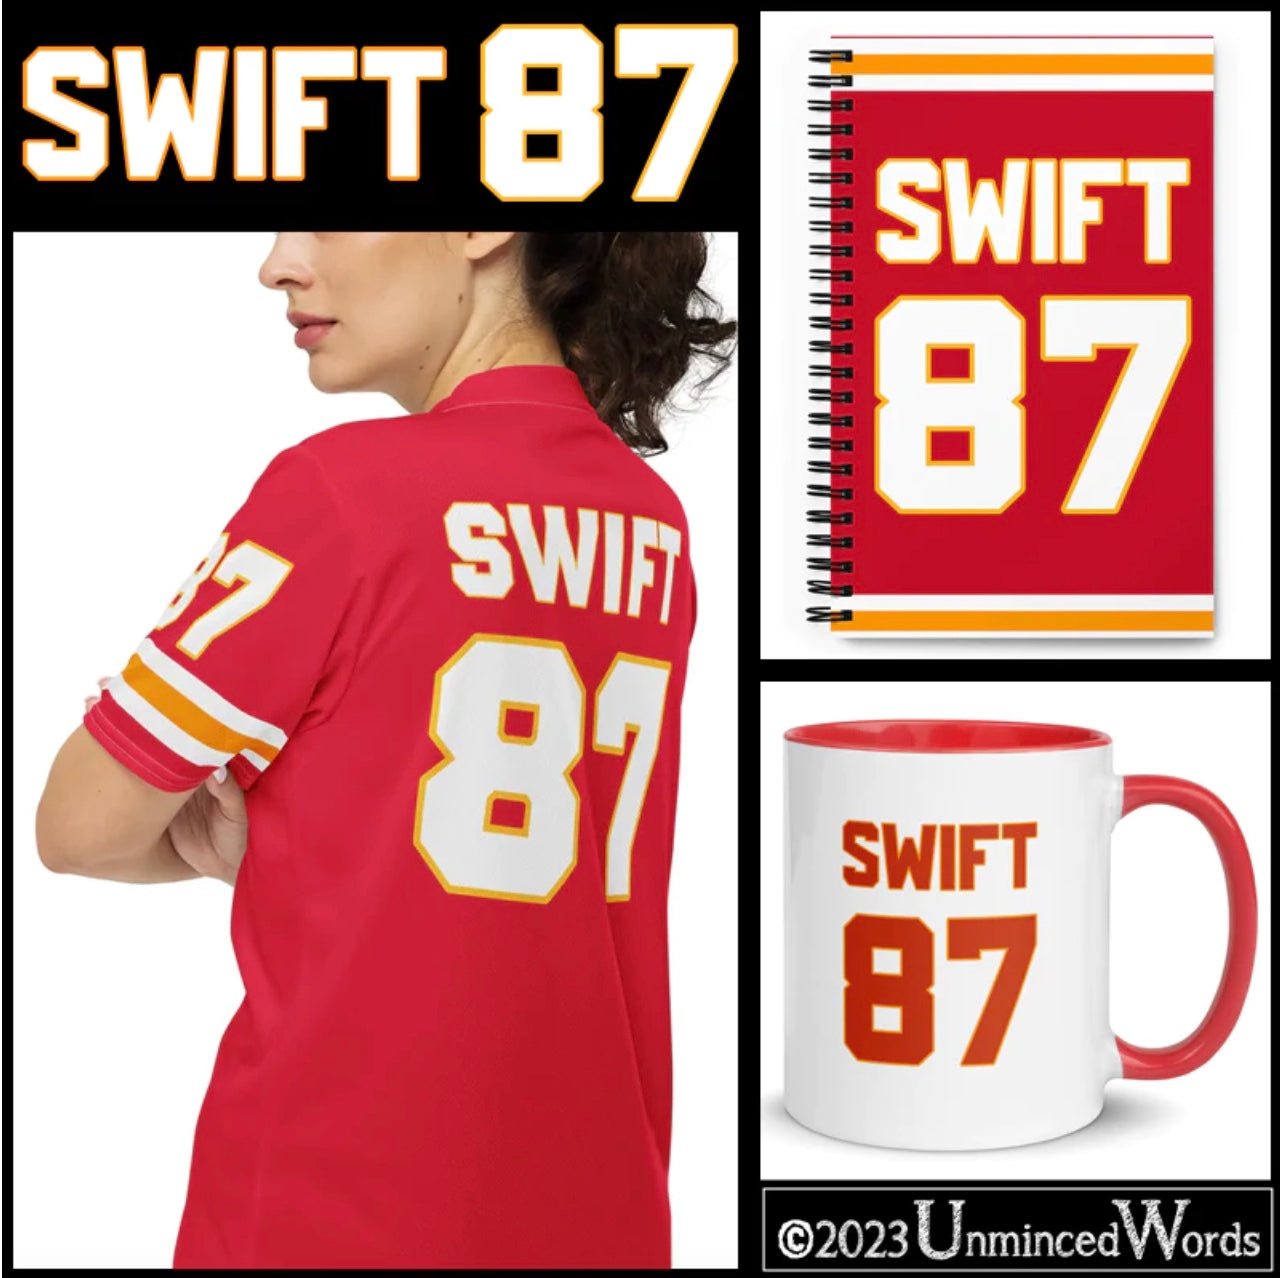 The Swift 87 Jersey is the one